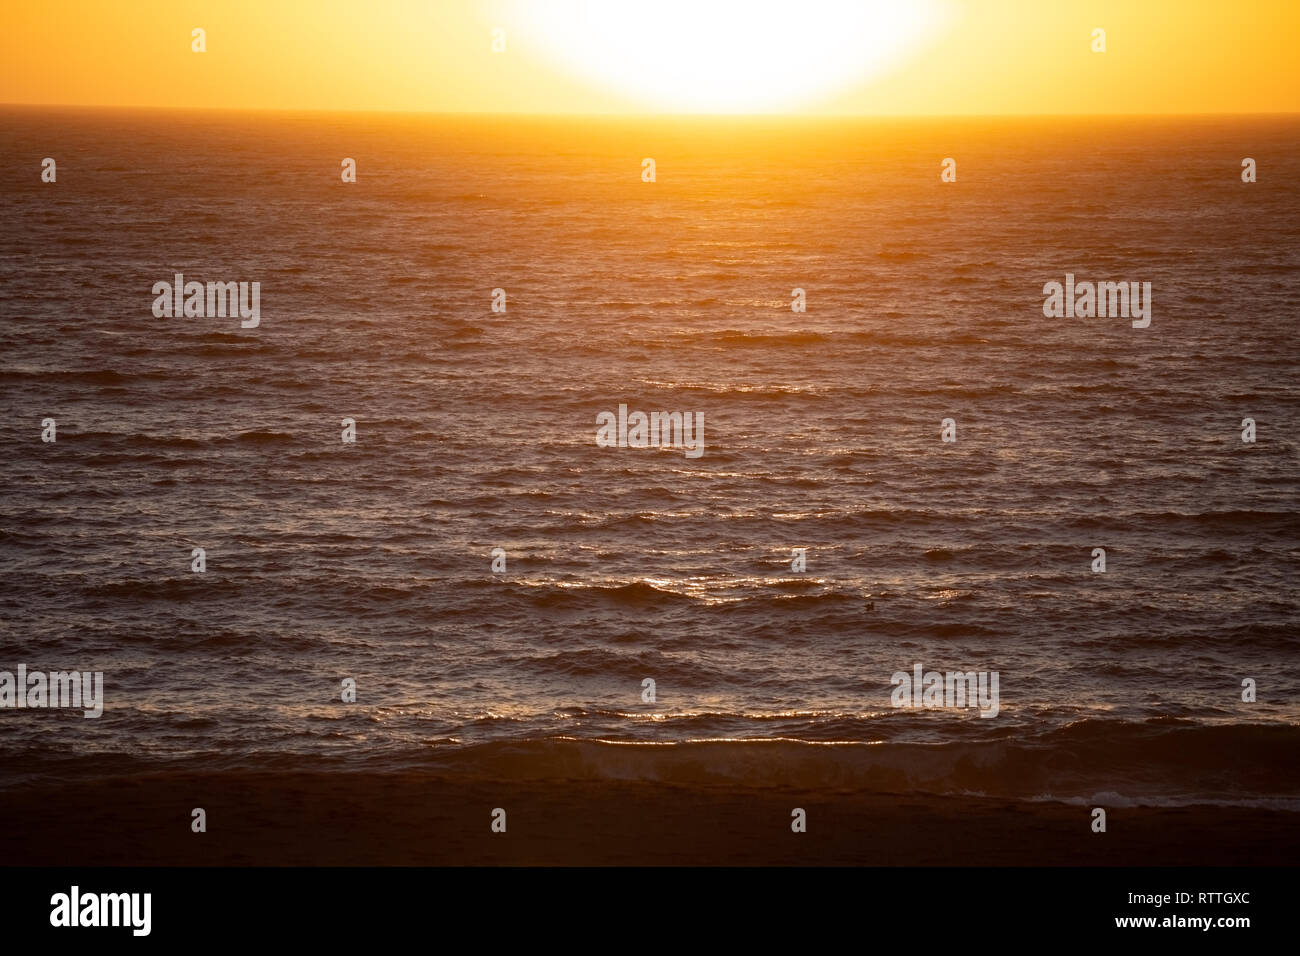 Waves lit by the setting sun over the Pacific Ocean, taken from Gualala, Mendocino County, California, America Stock Photo